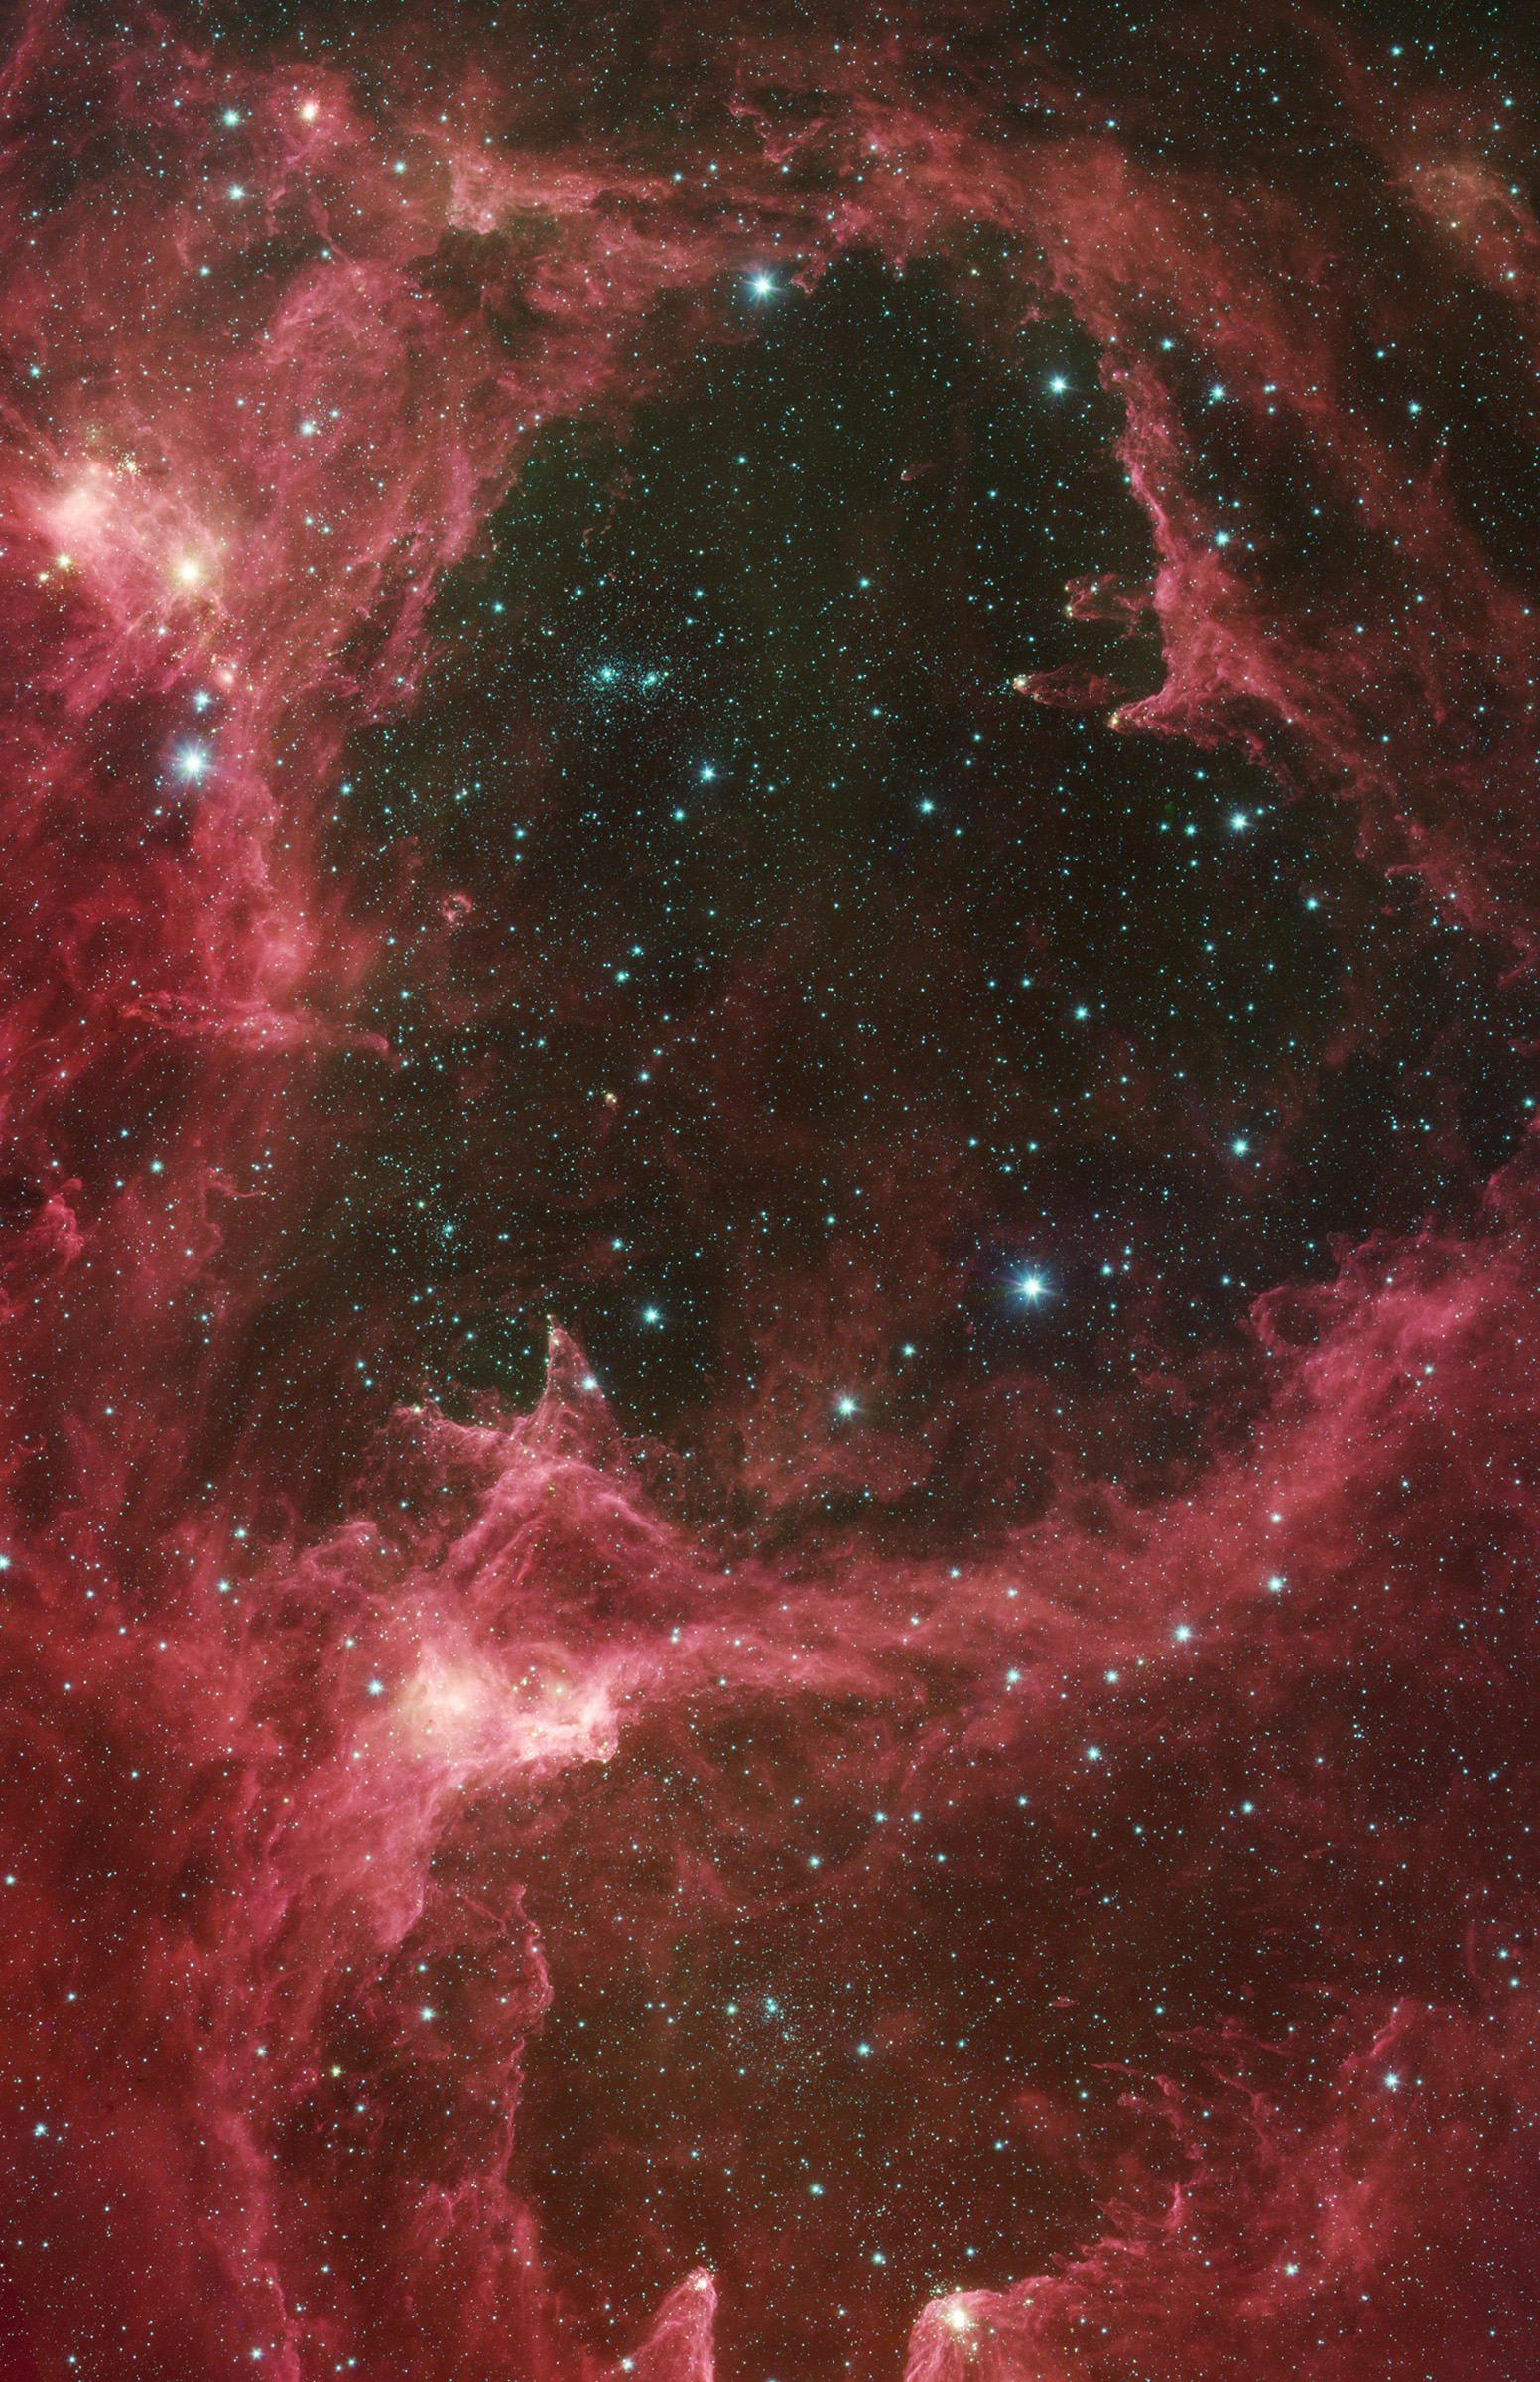 Generations of stars can be seen in this infrared portrait from NASA's Spitzer Space Telescope released in Aug. 2008. This image contains some of the best evidence yet for the triggered star-formation theory.